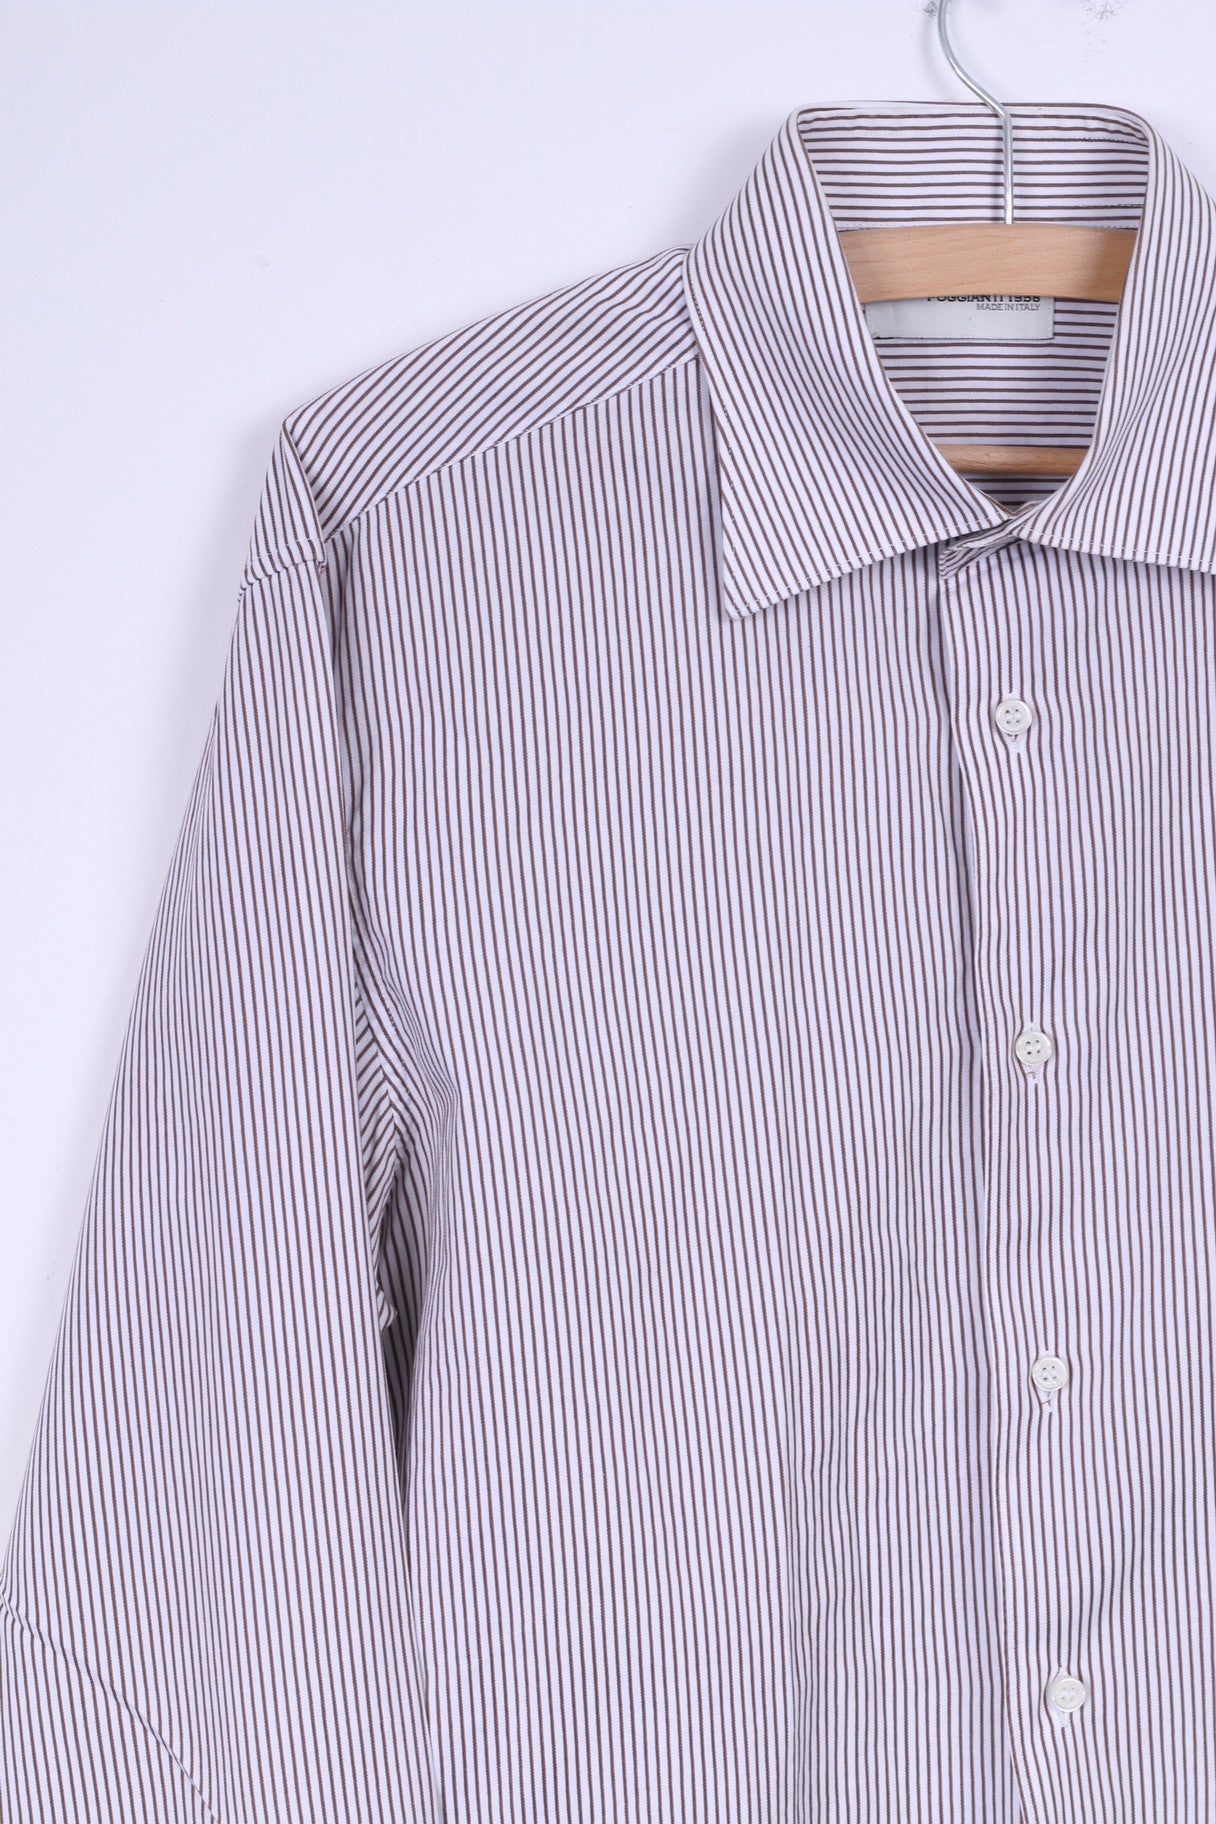 Poggianti Mens 39 15.5 M Casual Shirt White Brown Striped Cotton Italy Detailed Buttons Long Sleeve